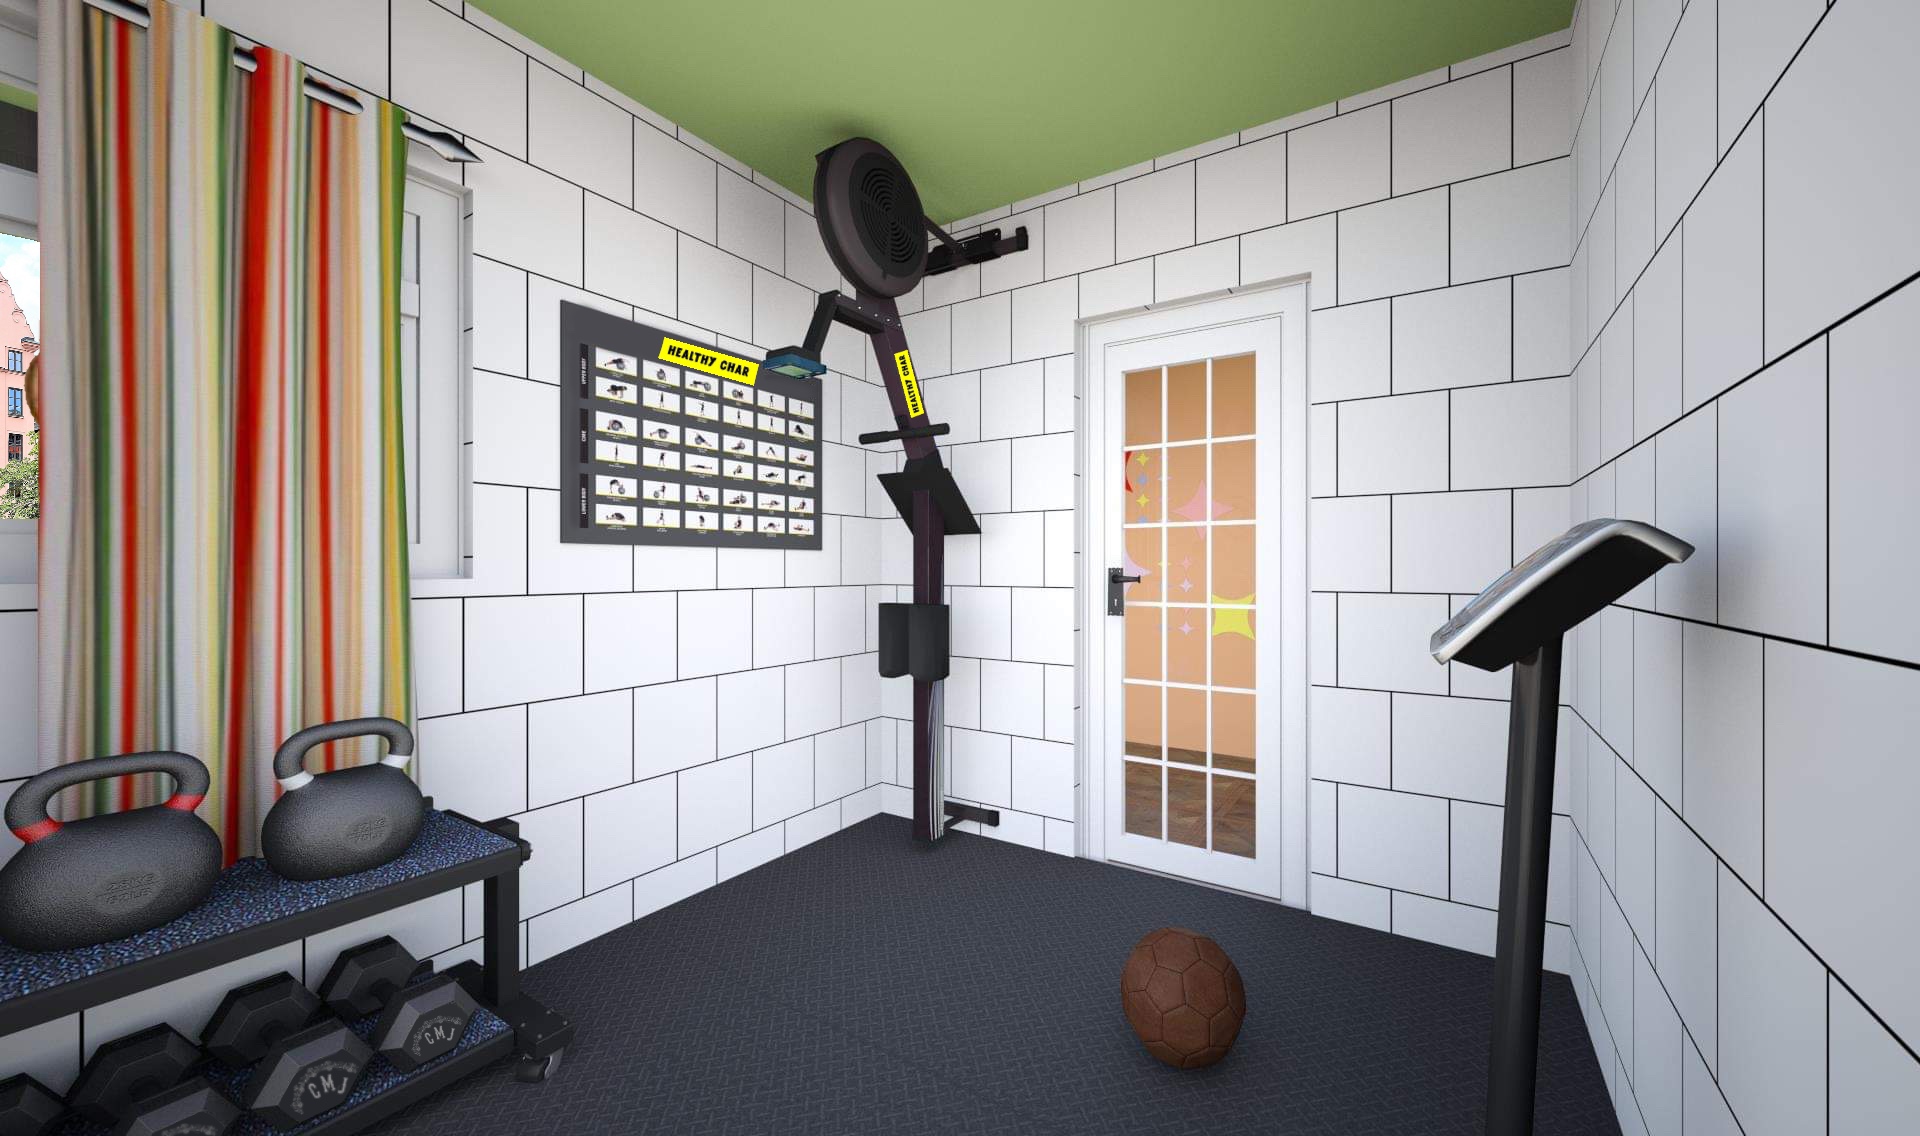 INT. SMALL HOME GYM 2 CLOSED DOOR – DAY